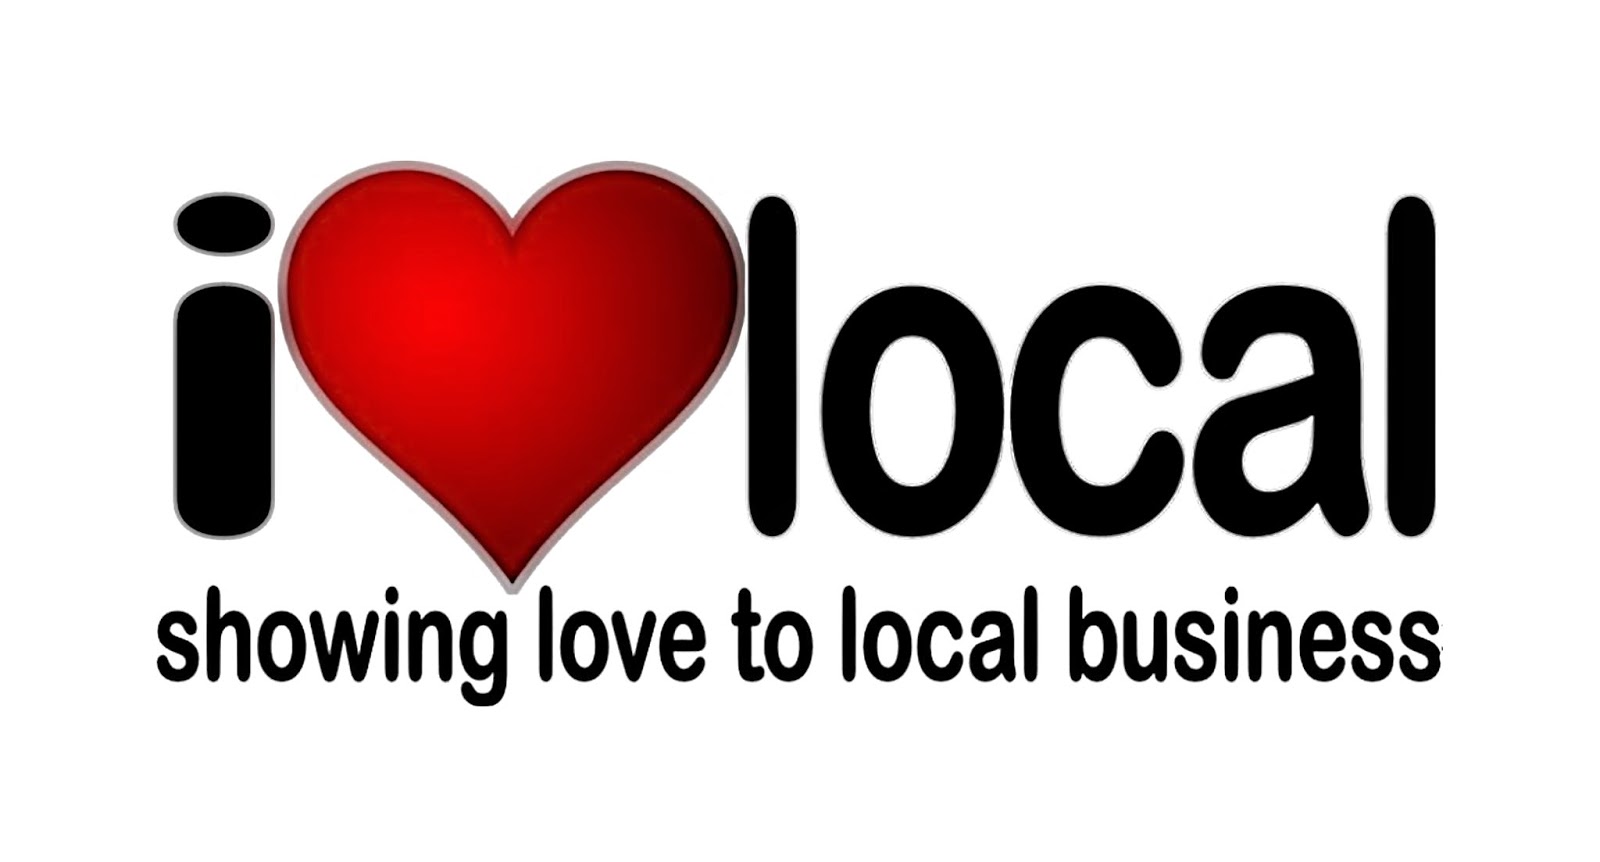 Live Local USA | A Voice for Small Business: Share The Love of ...